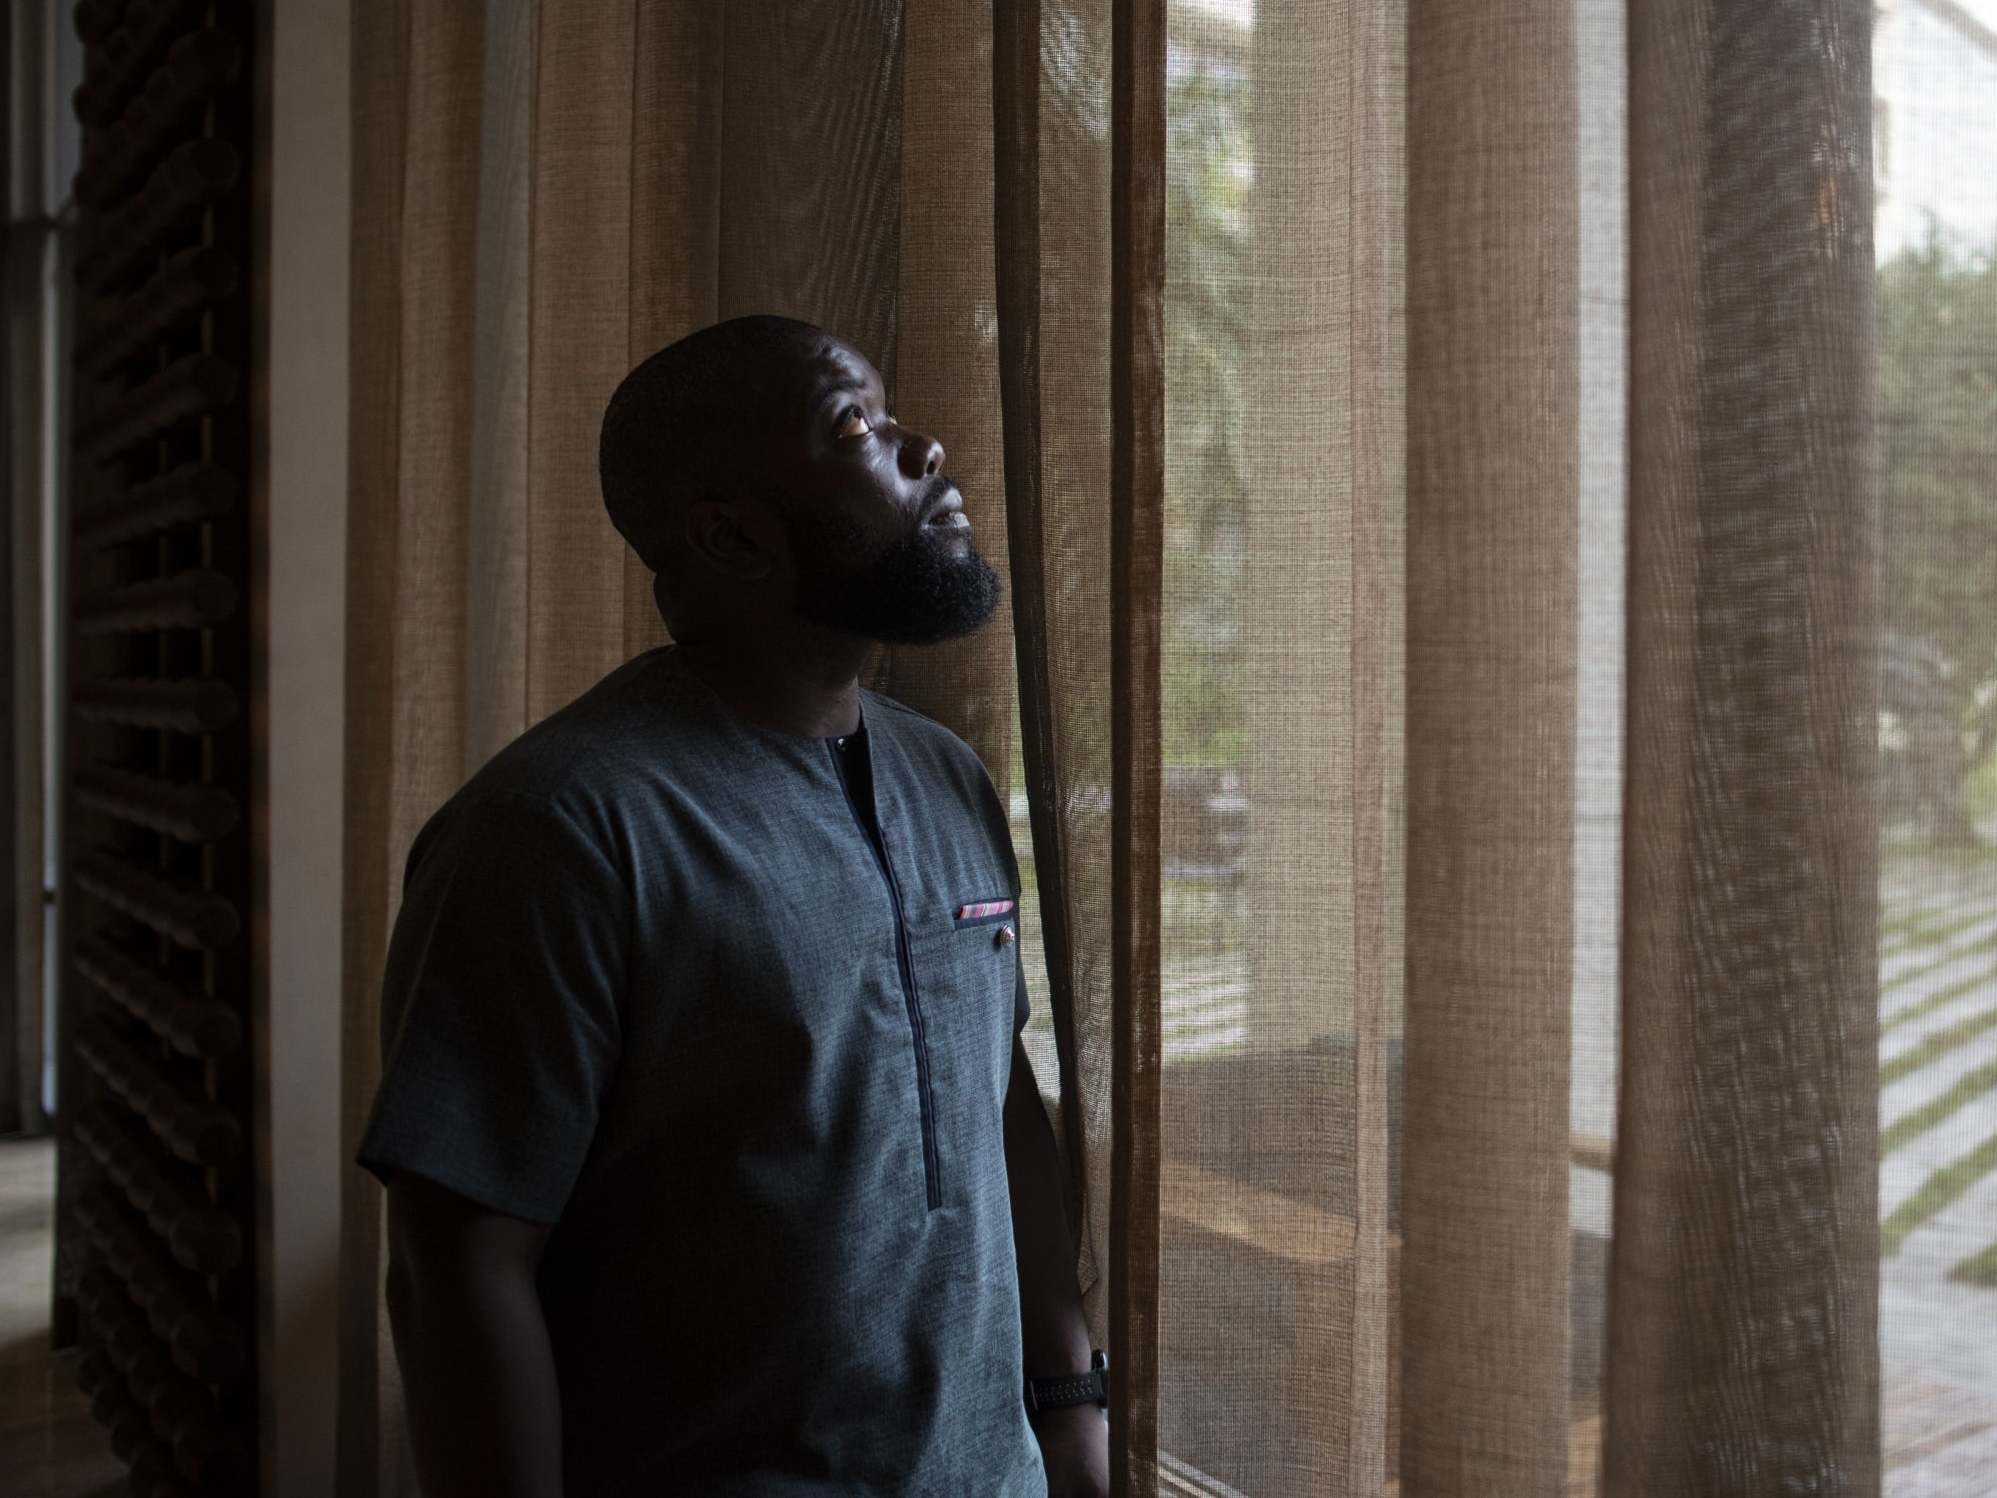 Kweku’s relationship and friendships fell apart upon his deportation to Ghana (Bloomberg/Getty)